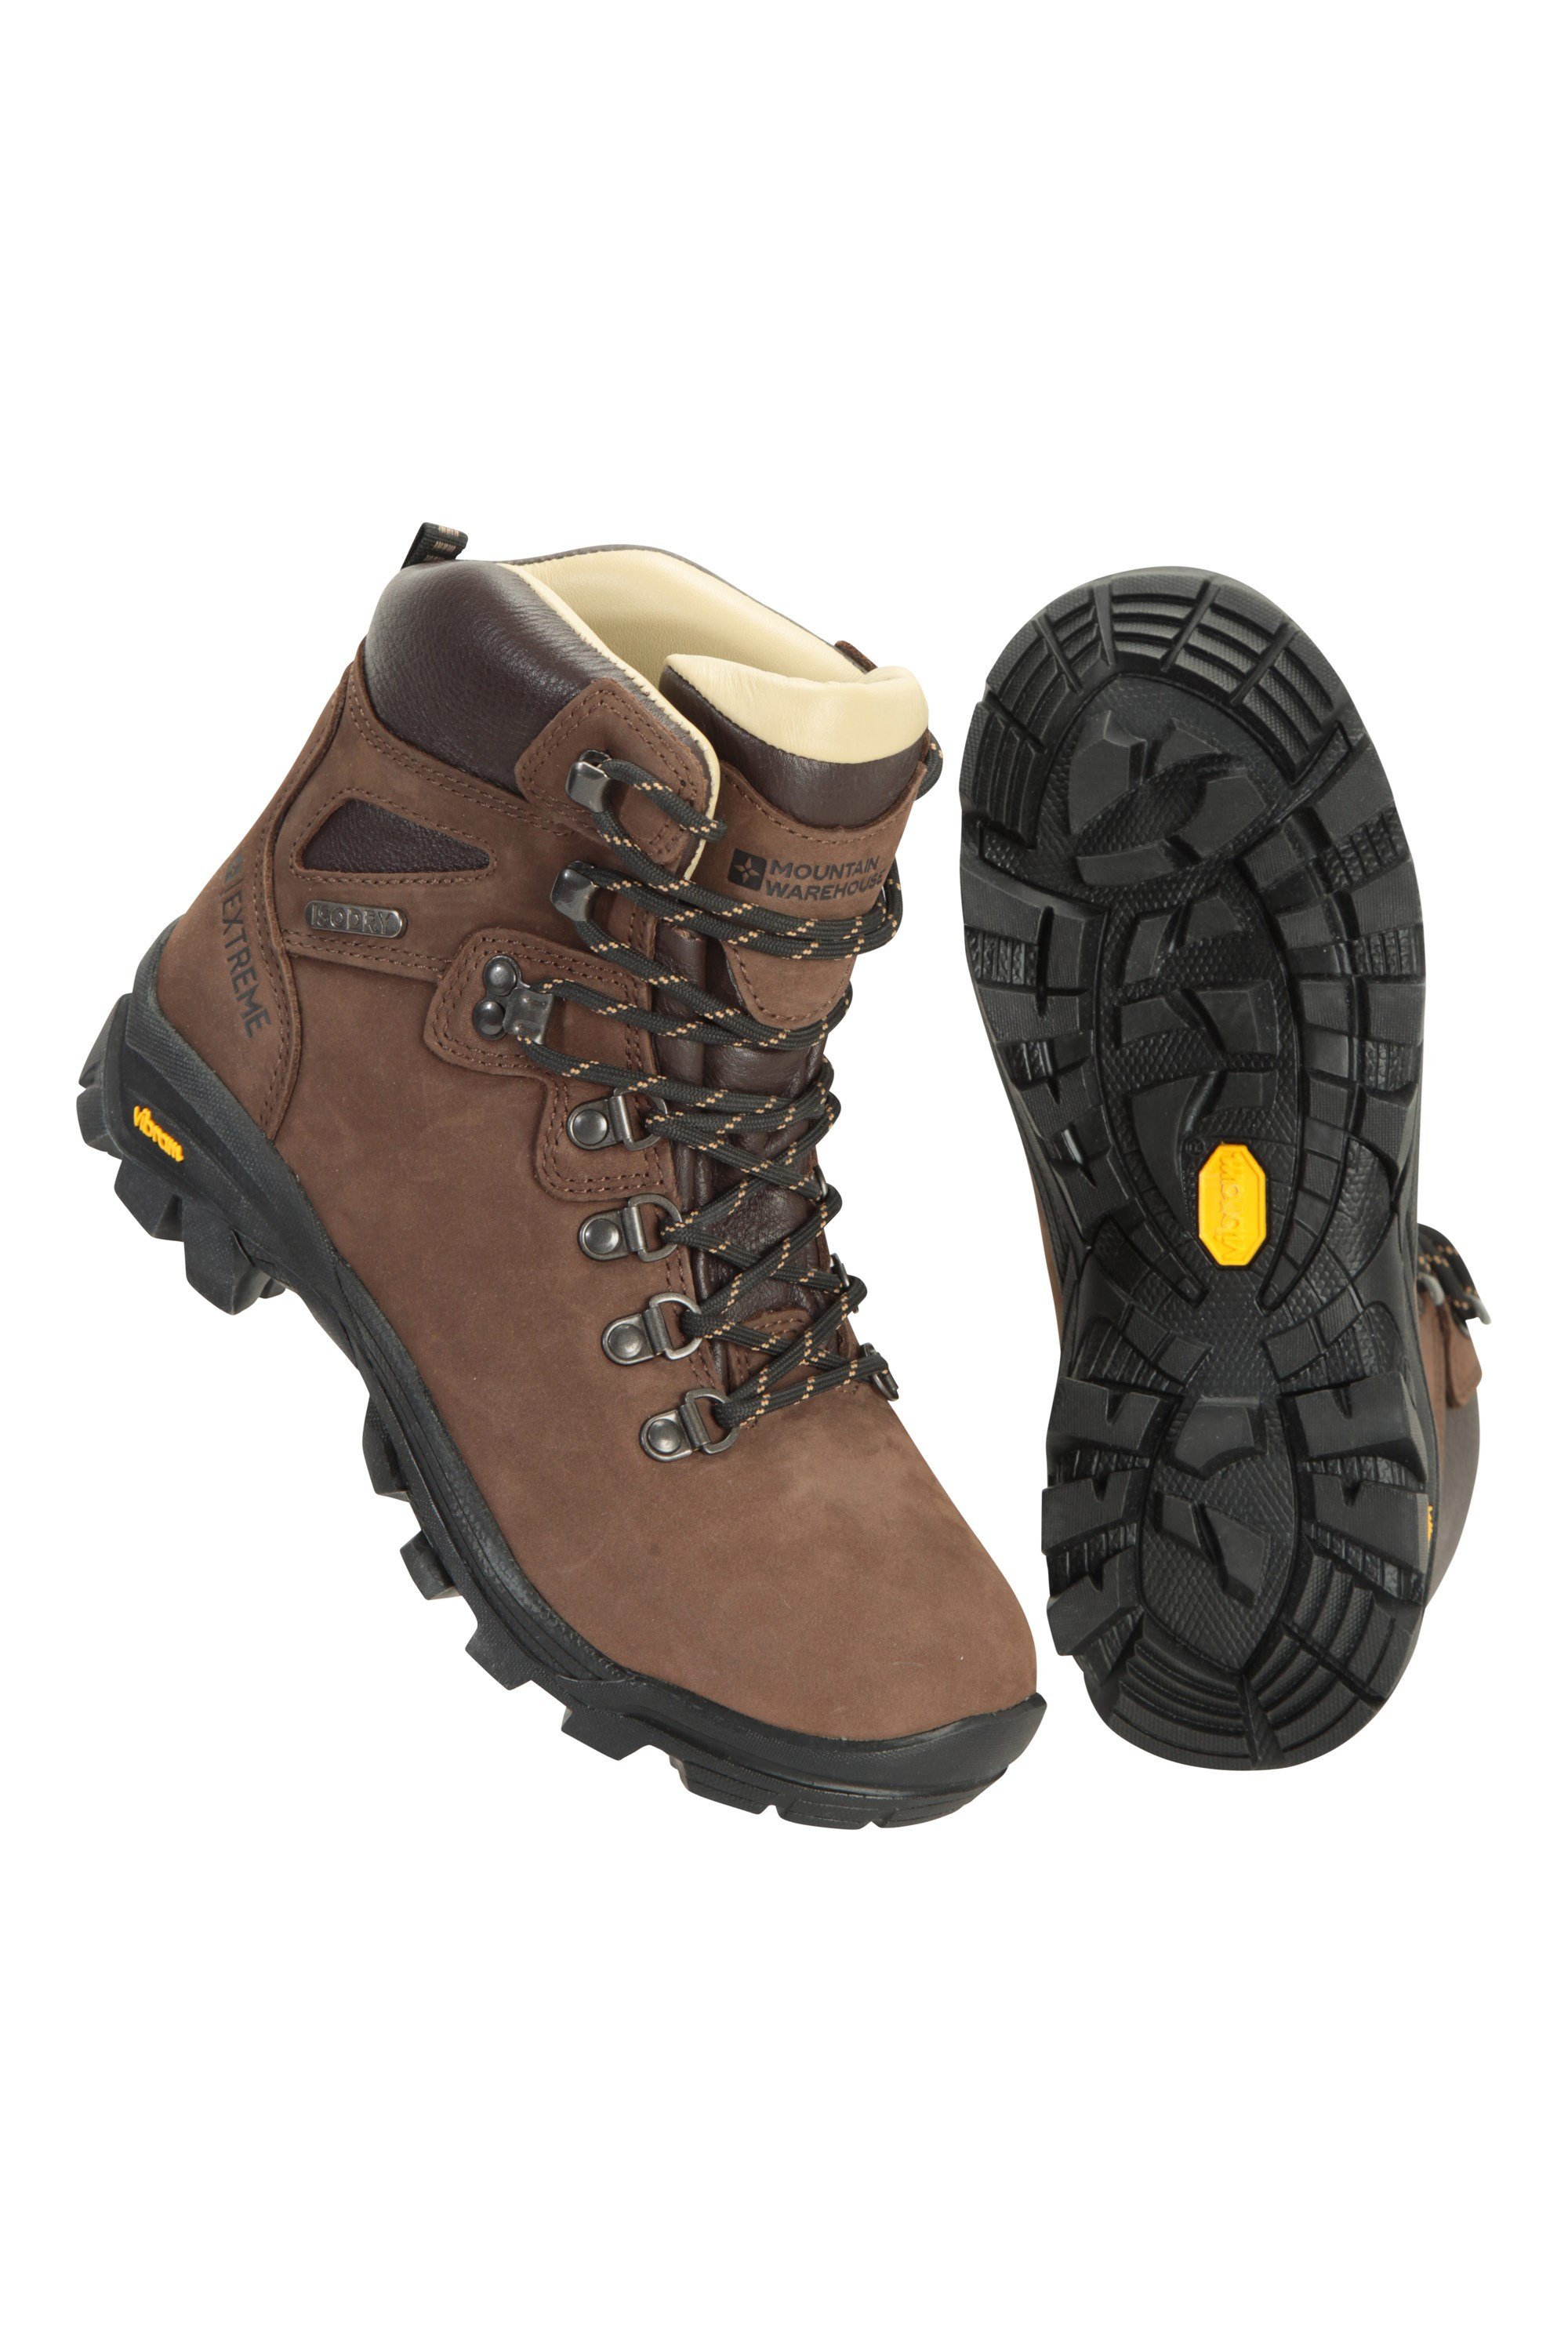 Mountain Warehouse Mountain Warehouse Mens Quest Extreme IsoGrip Boot Waterproof Leather Boots 